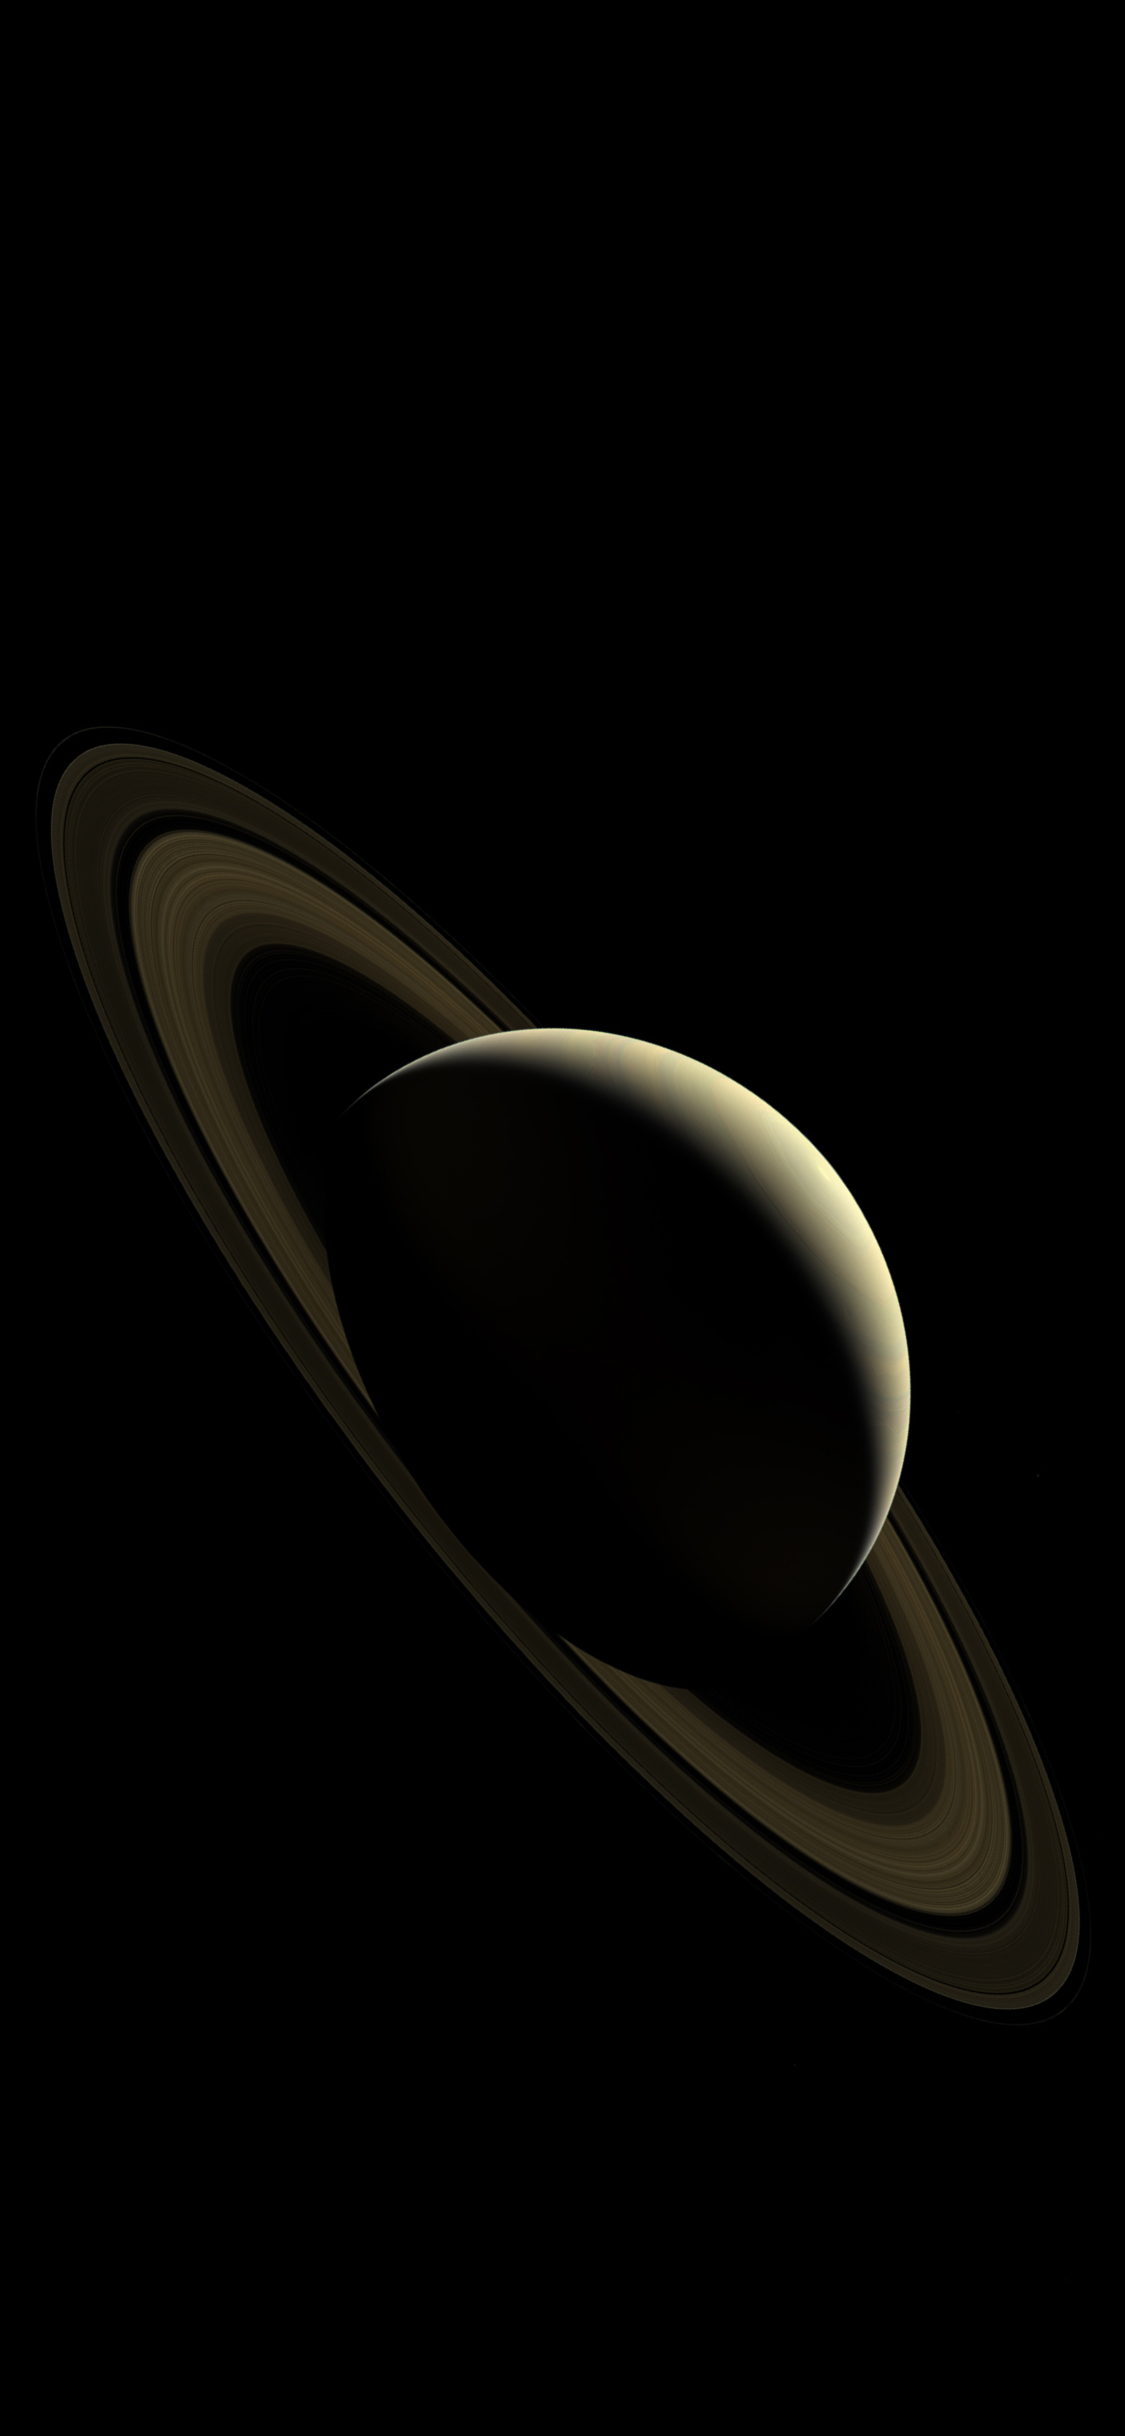 The Saturn Planet: Facts Of Saturn Planet. Saturn planet